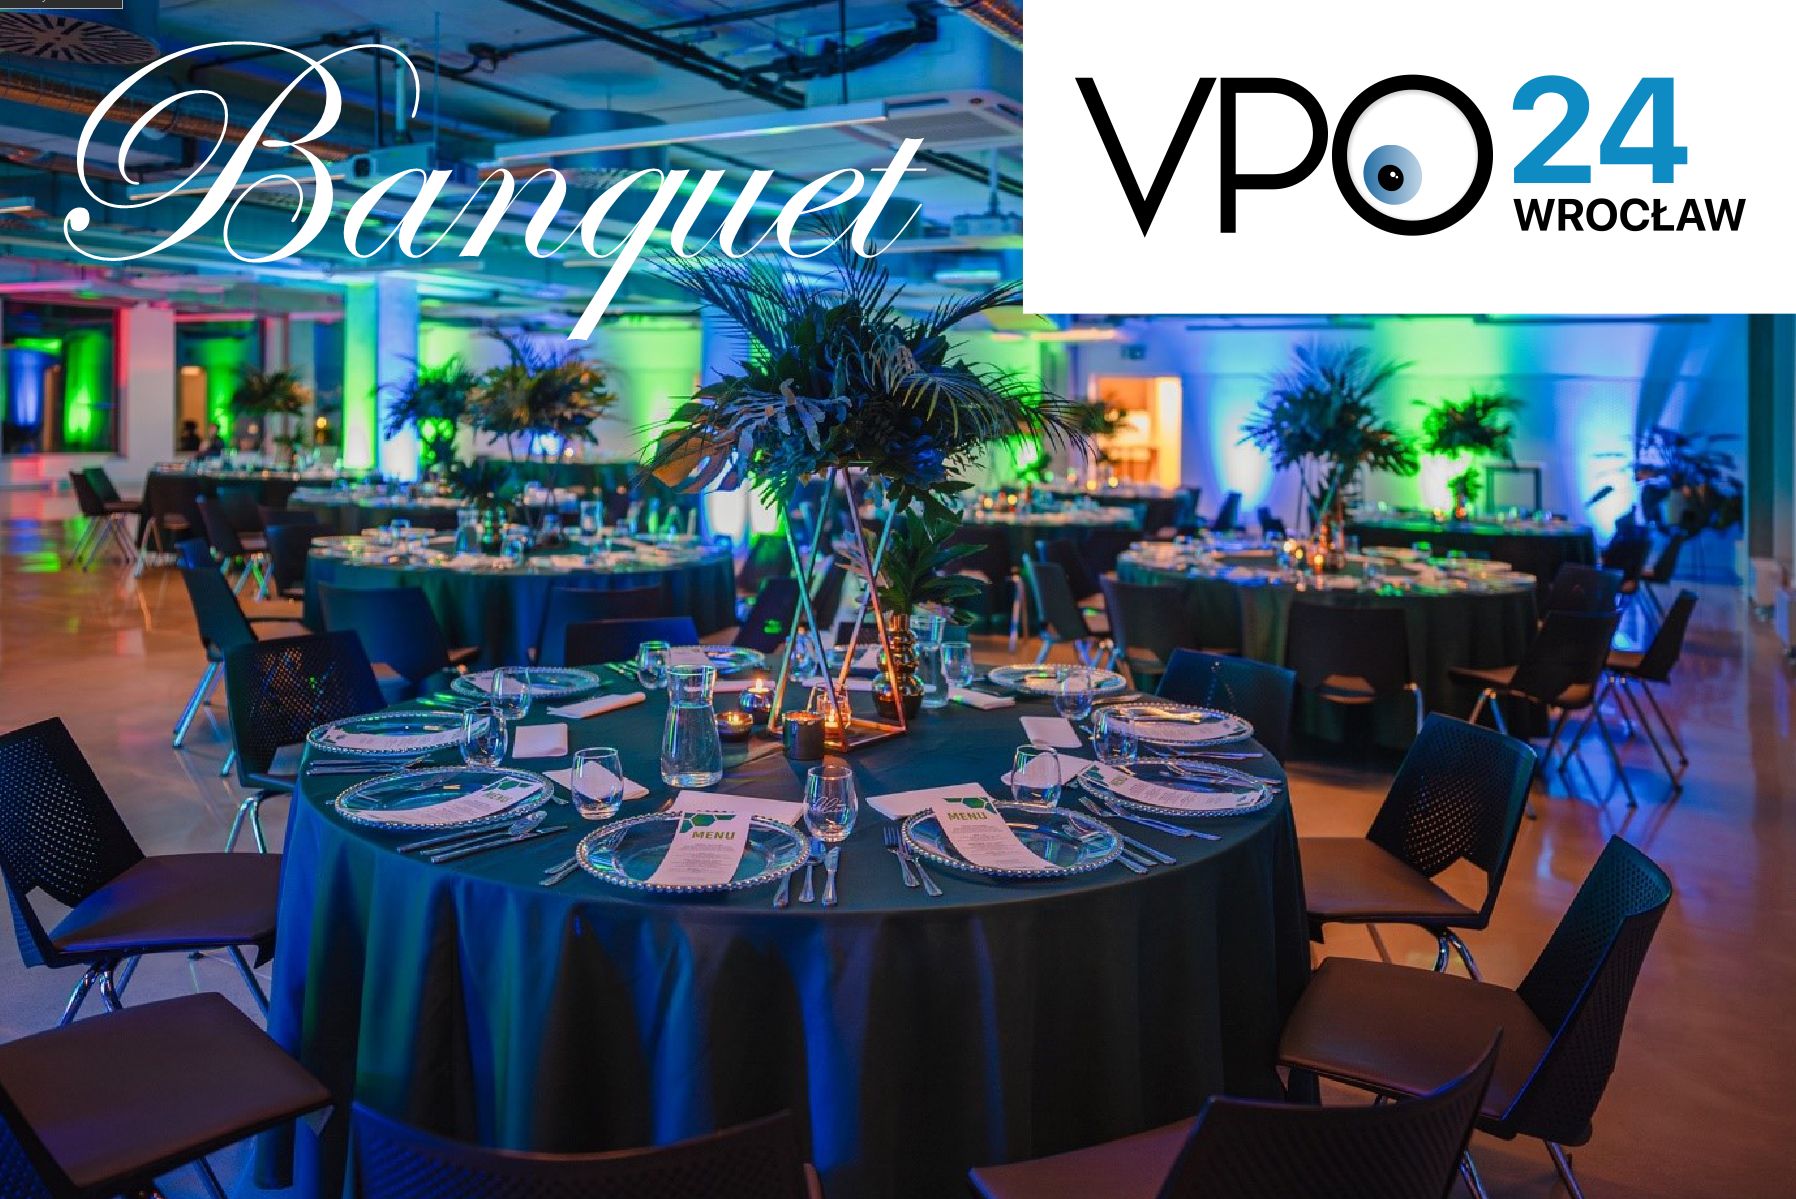 News on the VPO24 Conference Banquet